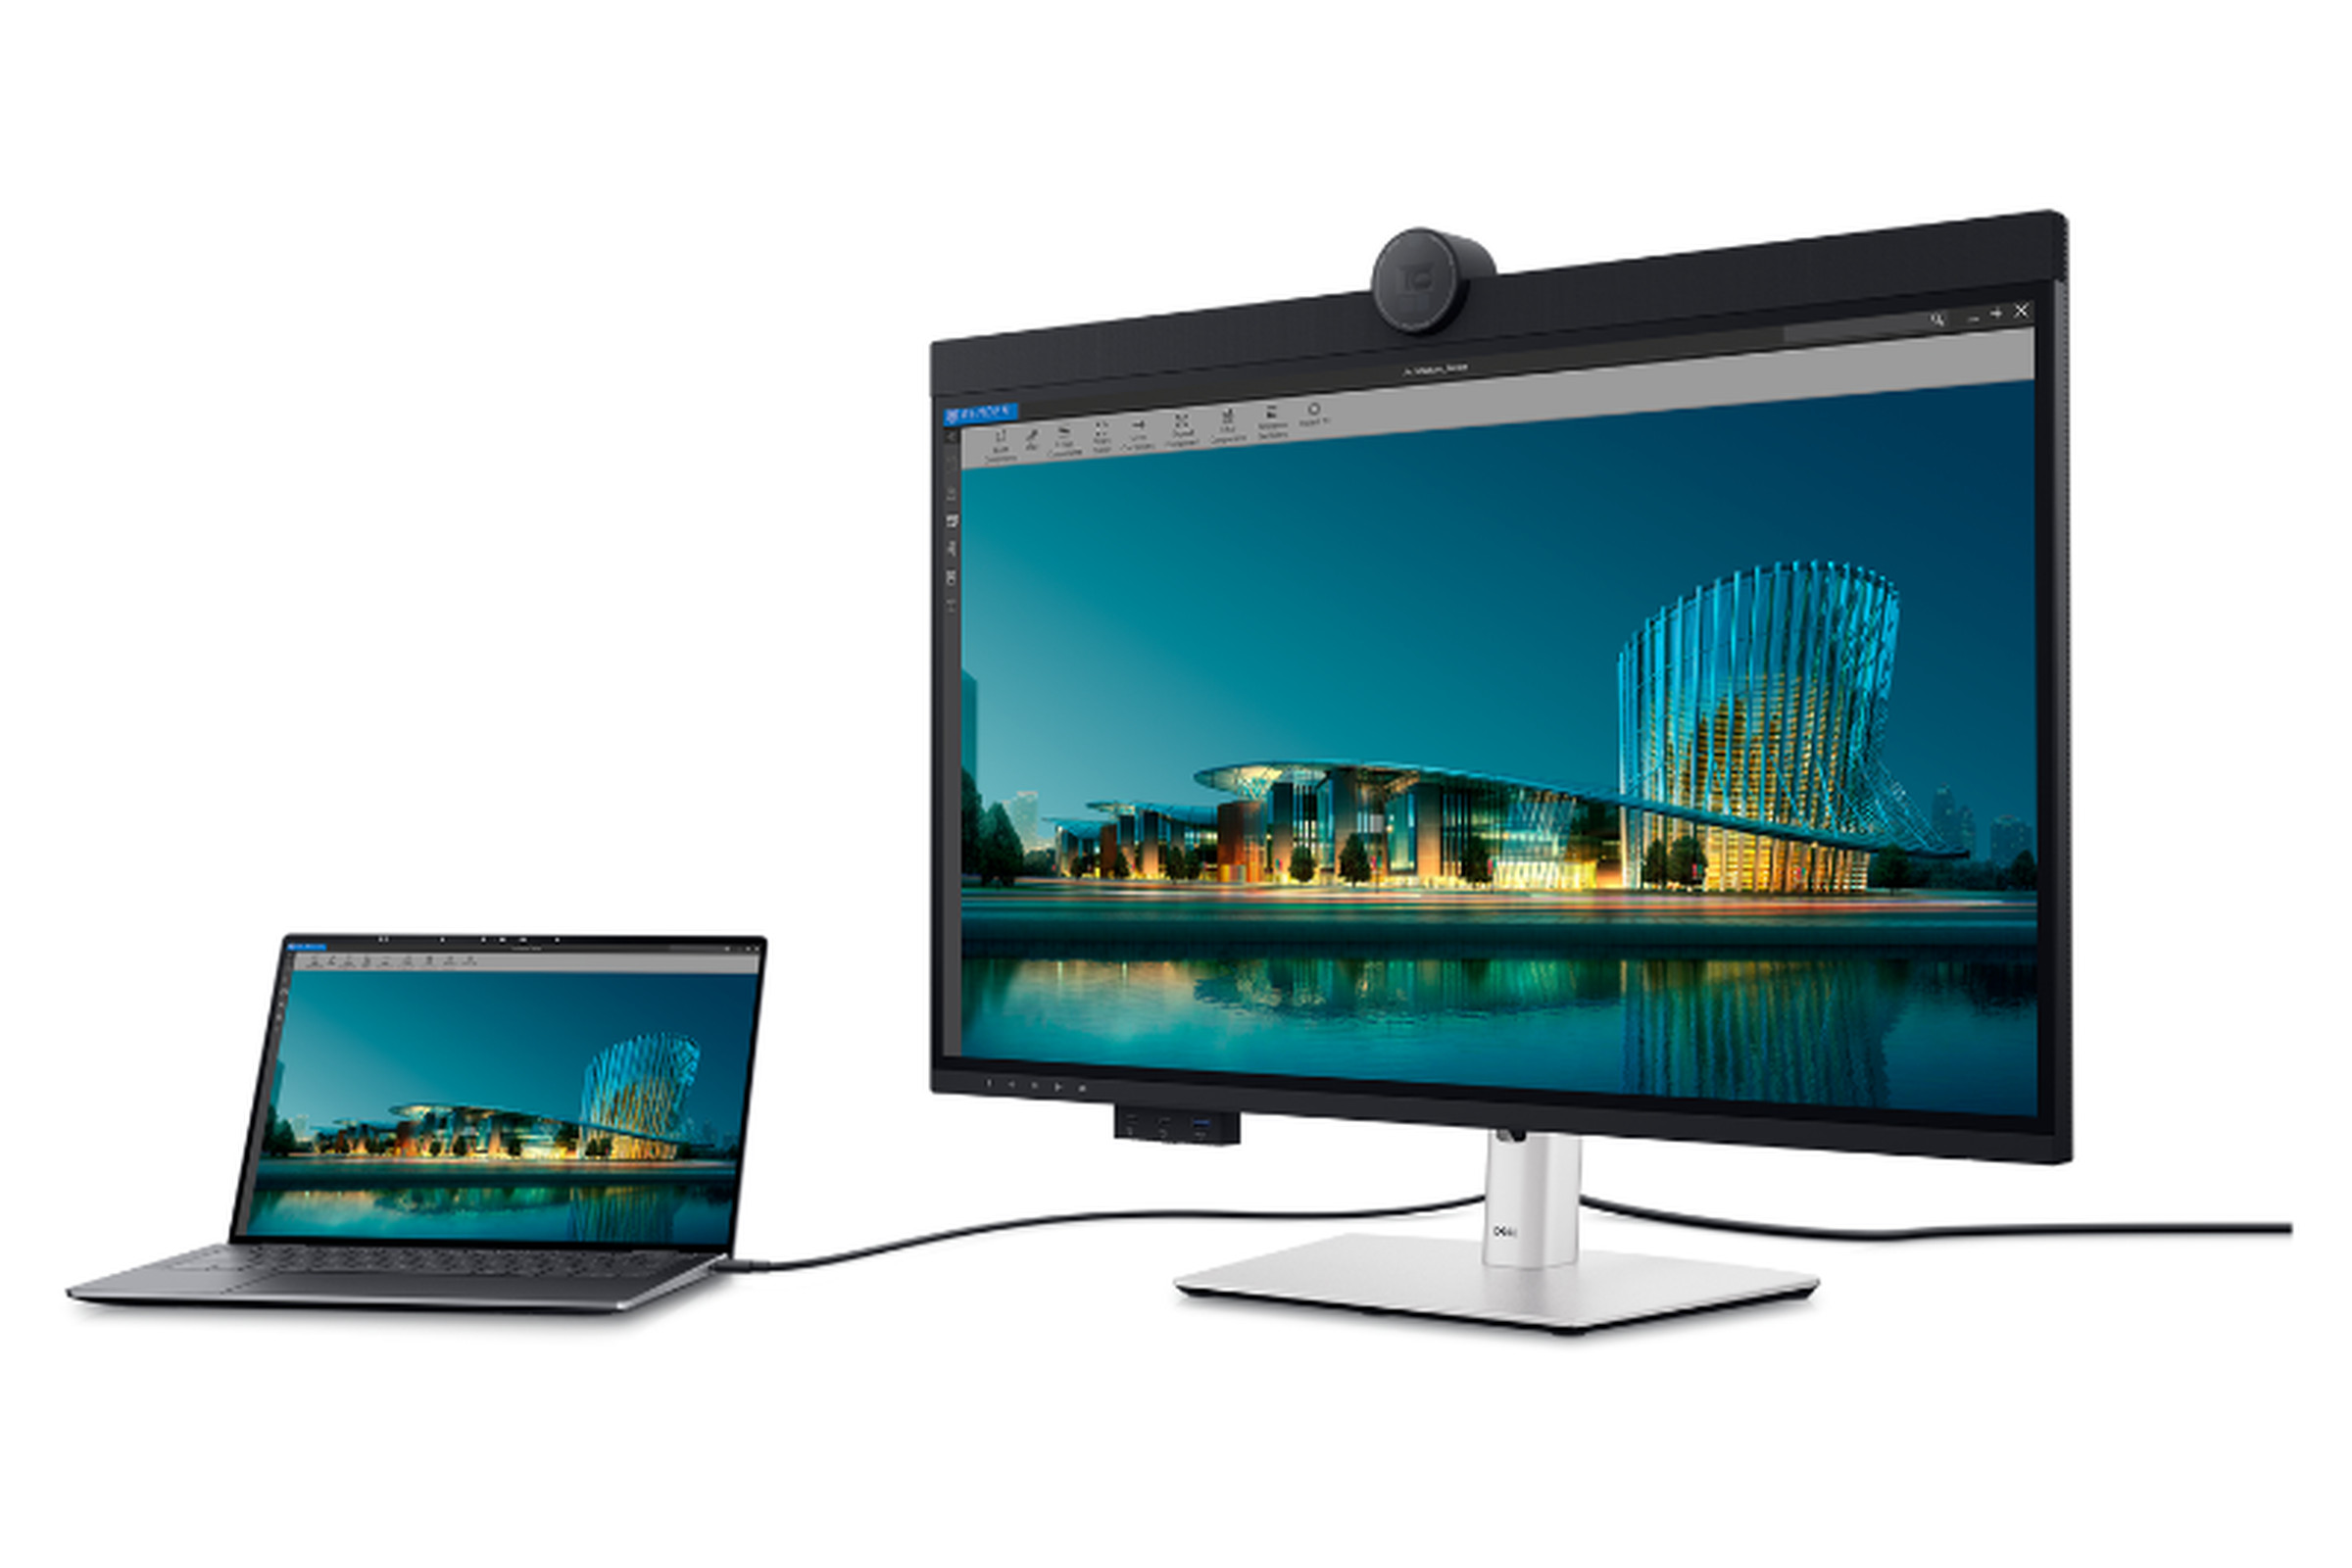 An image showing Dell’s 32-inch monitor with a laptop attached